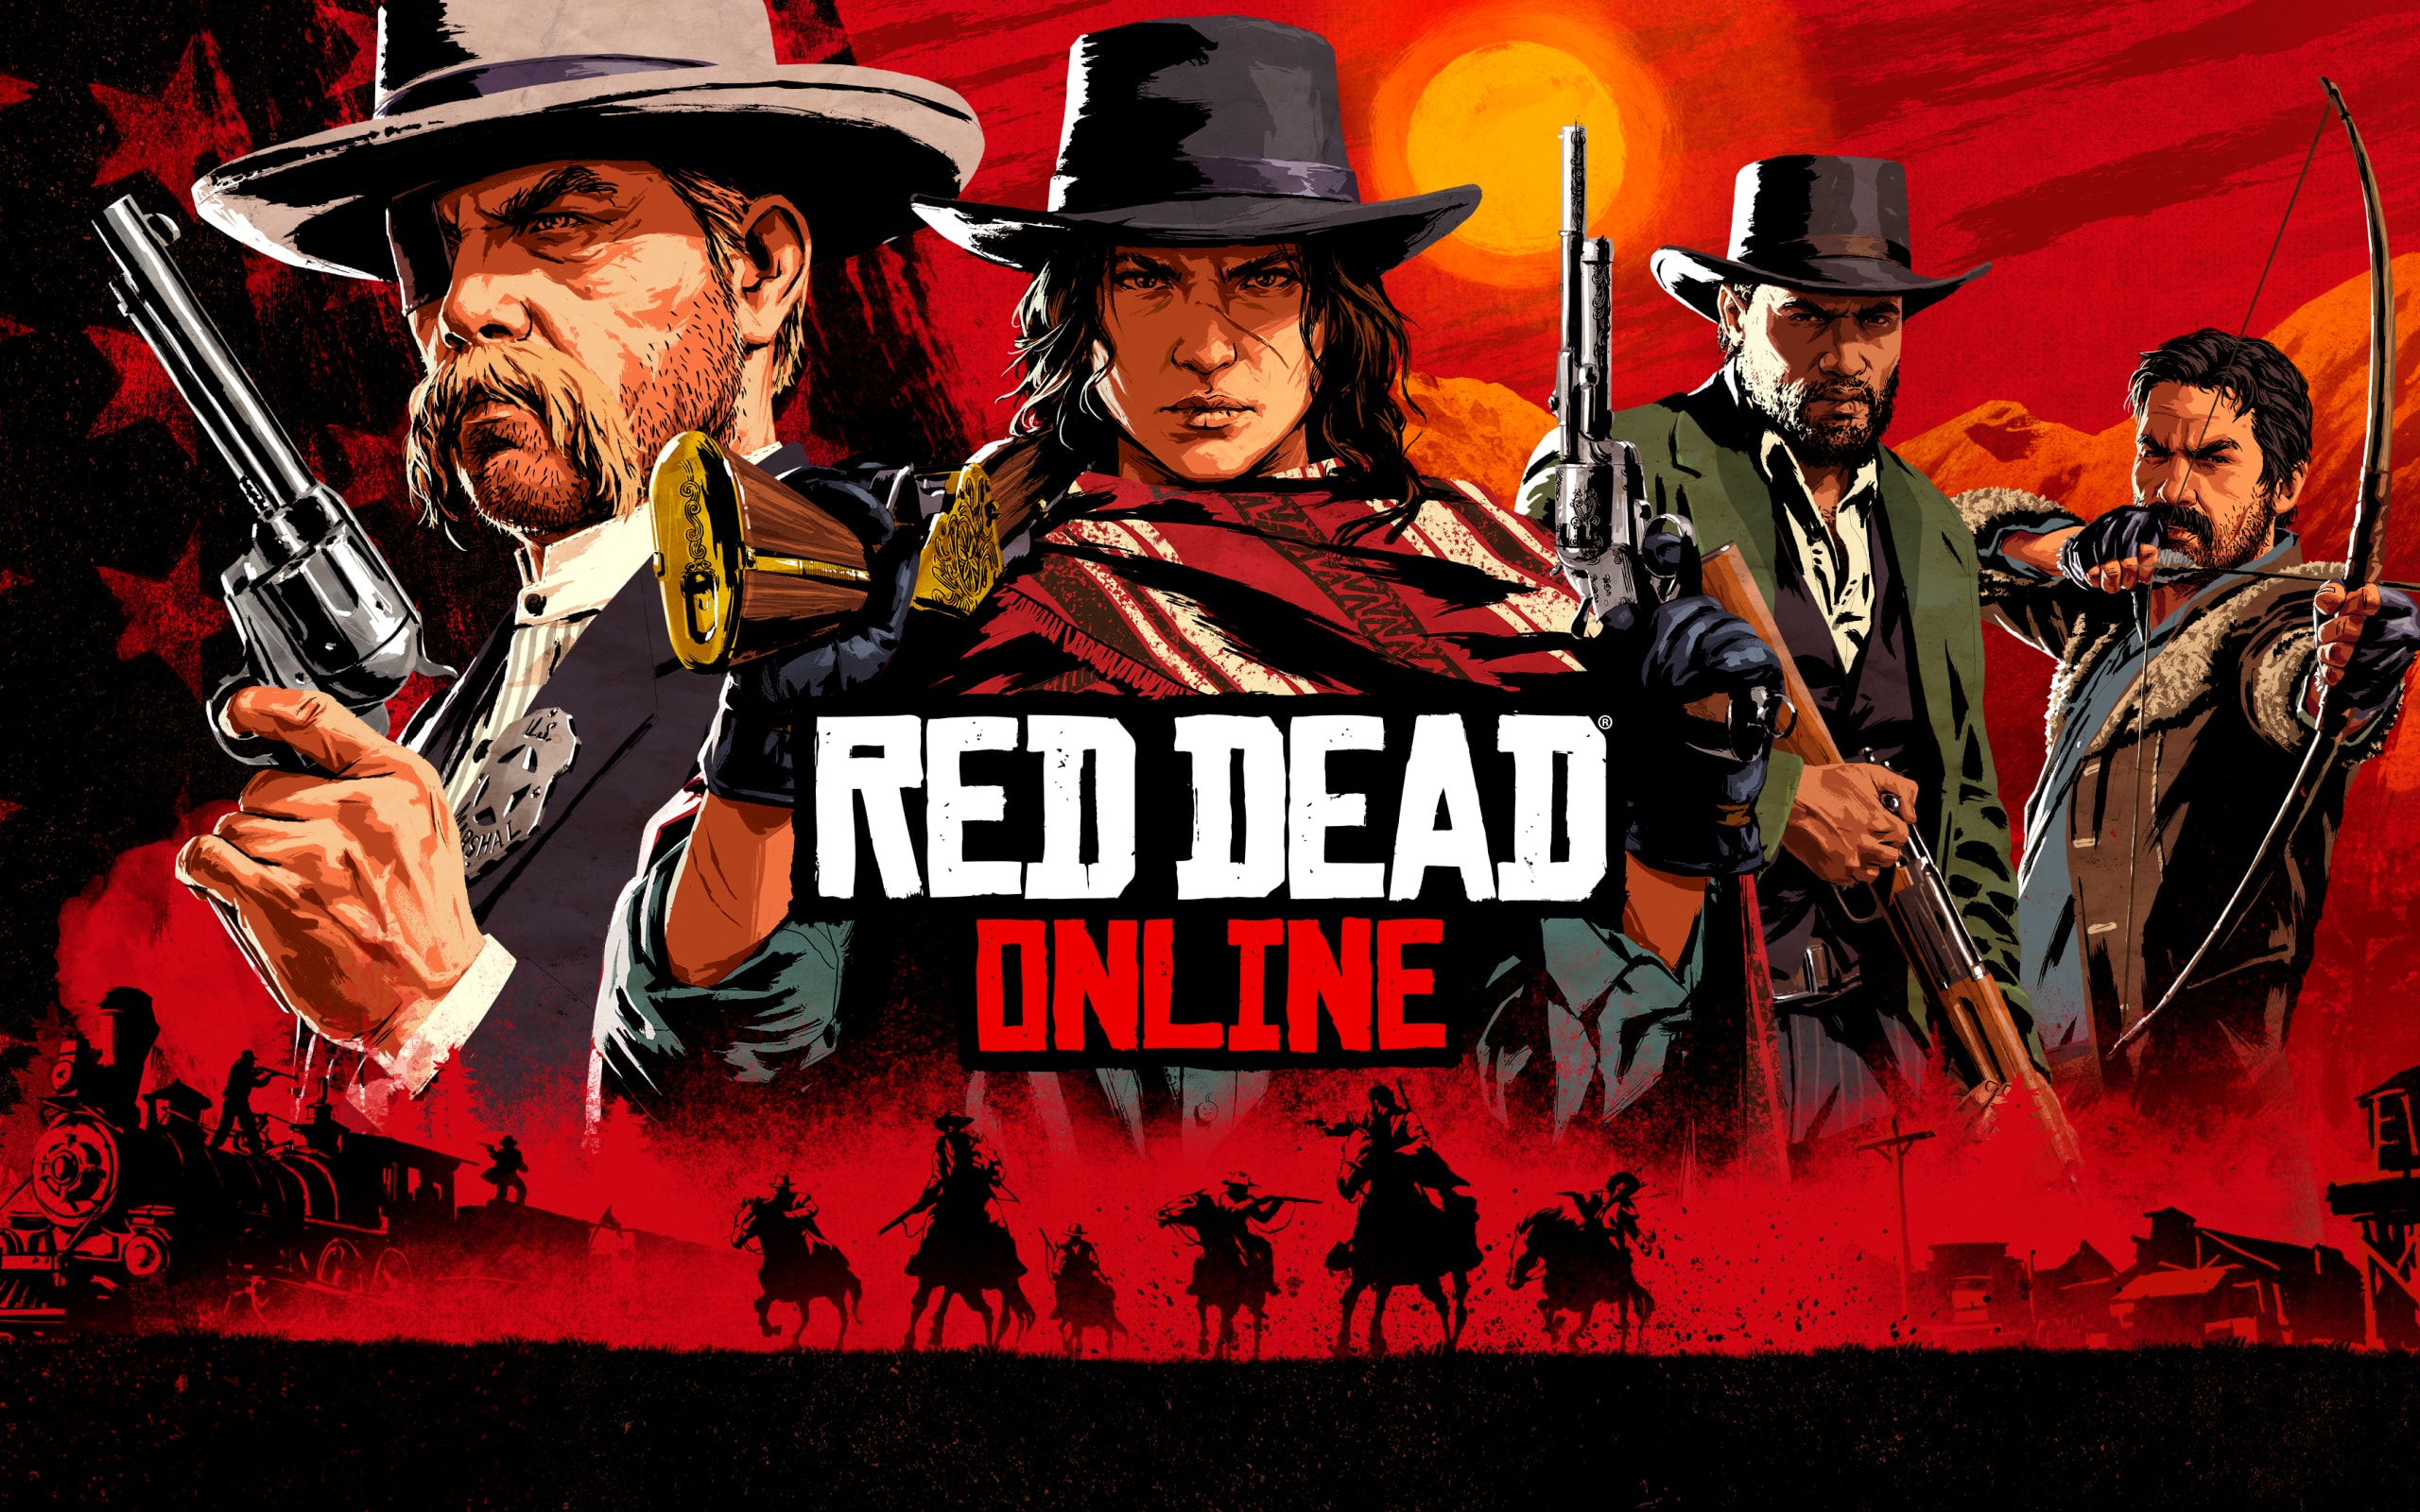 Wallpaper Of Video Game, Red Dead Redemption 2, Rdr2, - Red Dead Online Ps4 - HD Wallpaper 